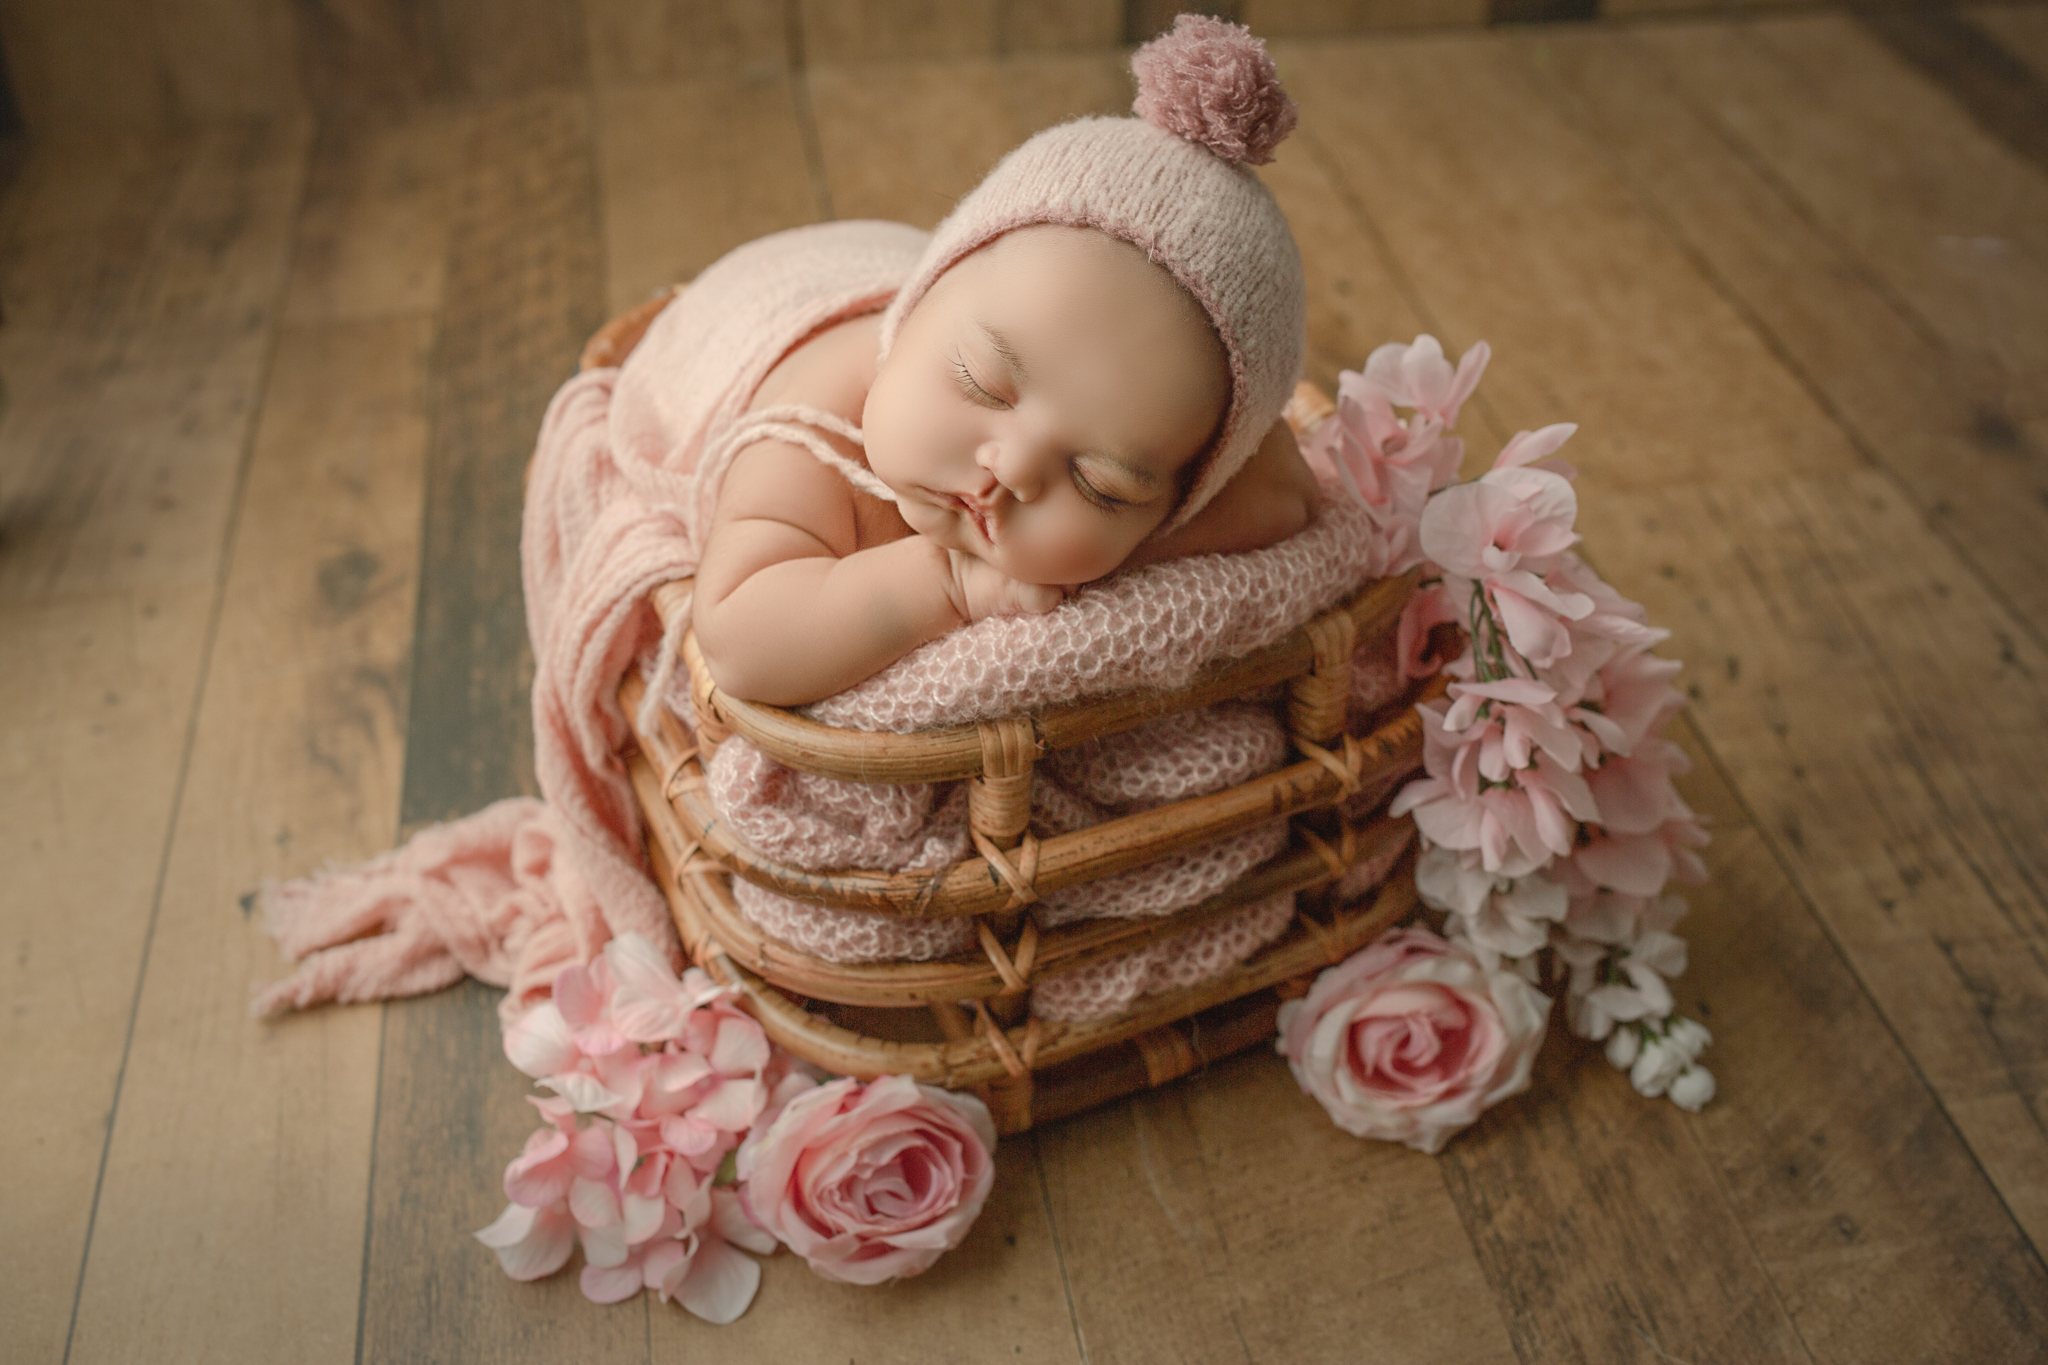 burlington newborn photographer poses baby in bamboo basket with pink florals and pom pom bonnet